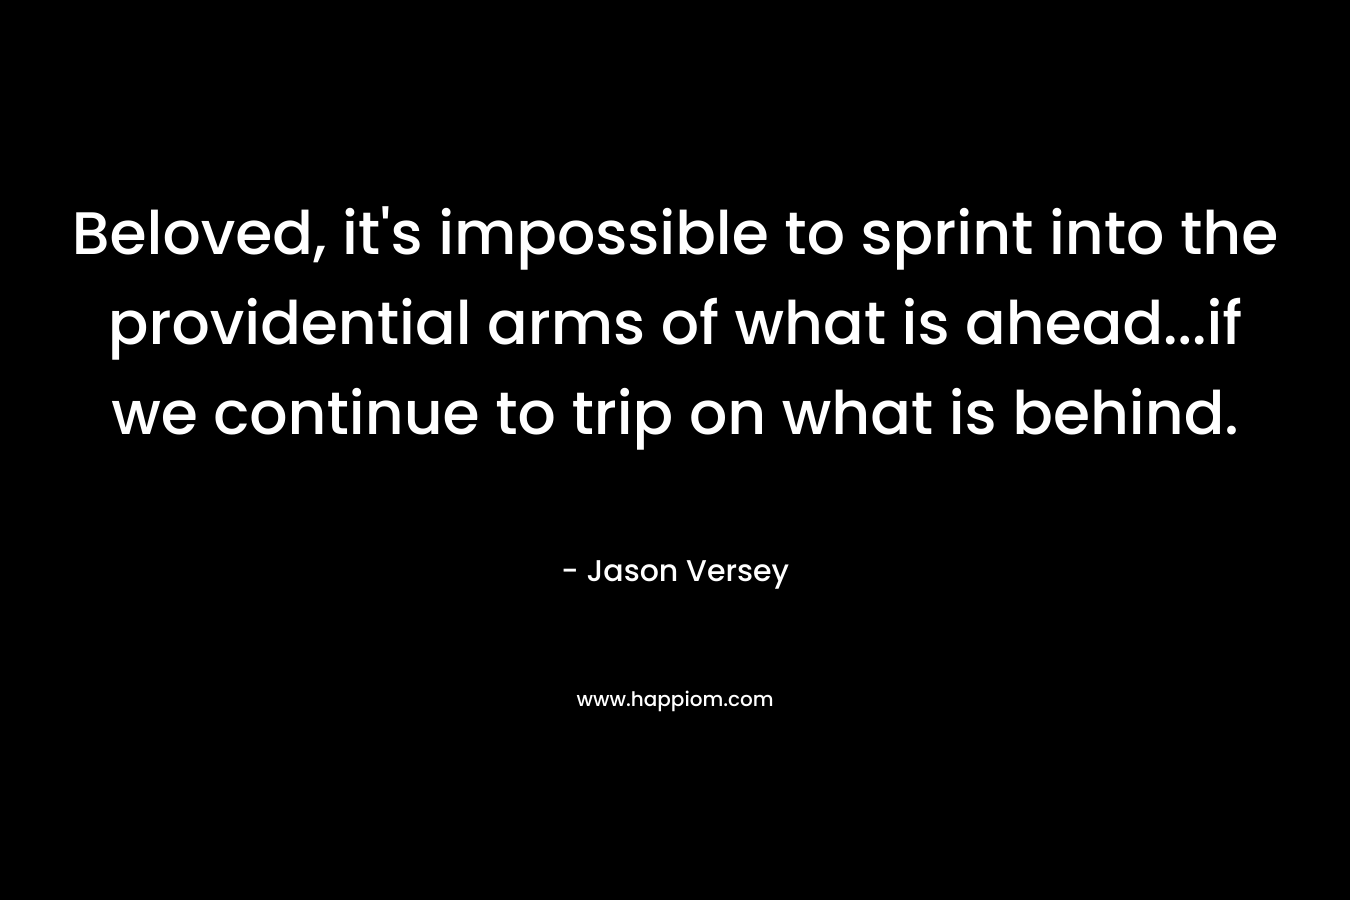 Beloved, it’s impossible to sprint into the providential arms of what is ahead…if we continue to trip on what is behind. – Jason Versey